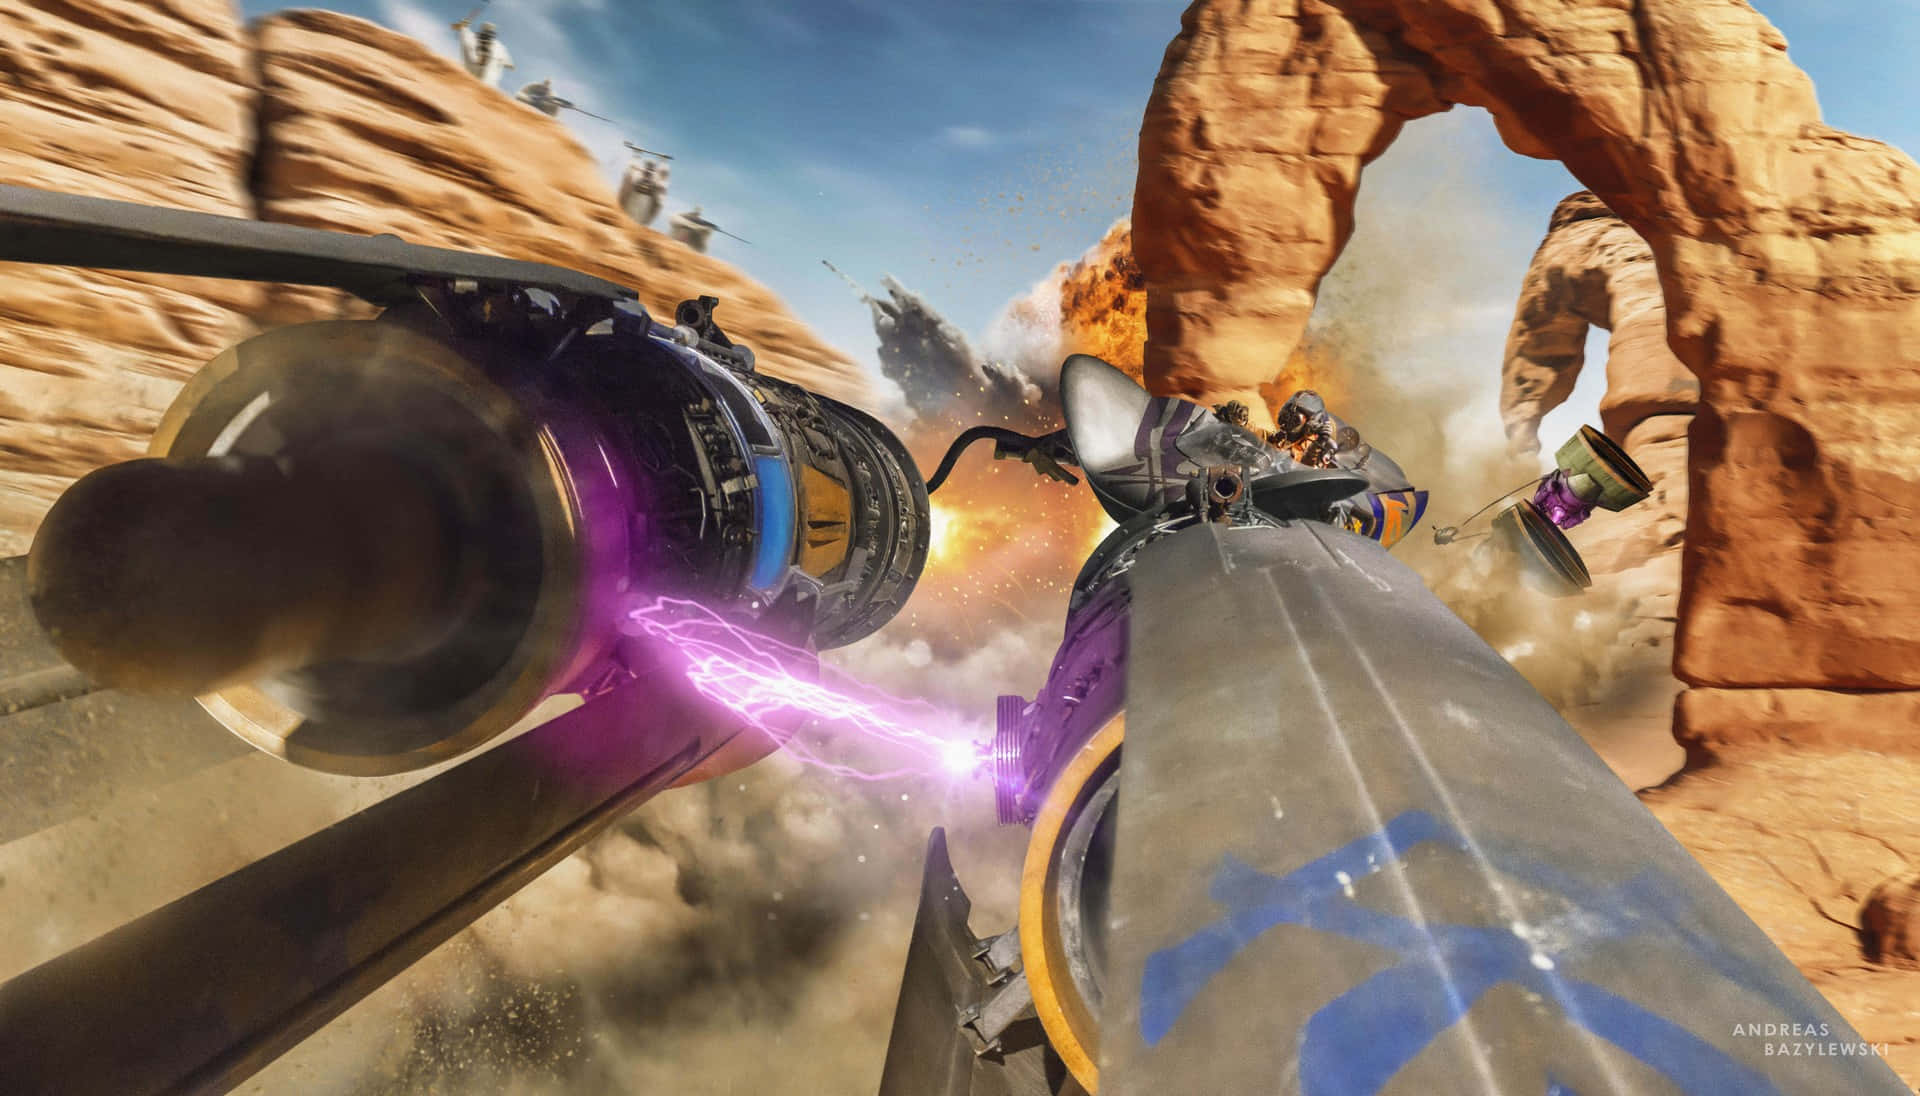 High-speed Podracing action in a breathtaking landscape Wallpaper